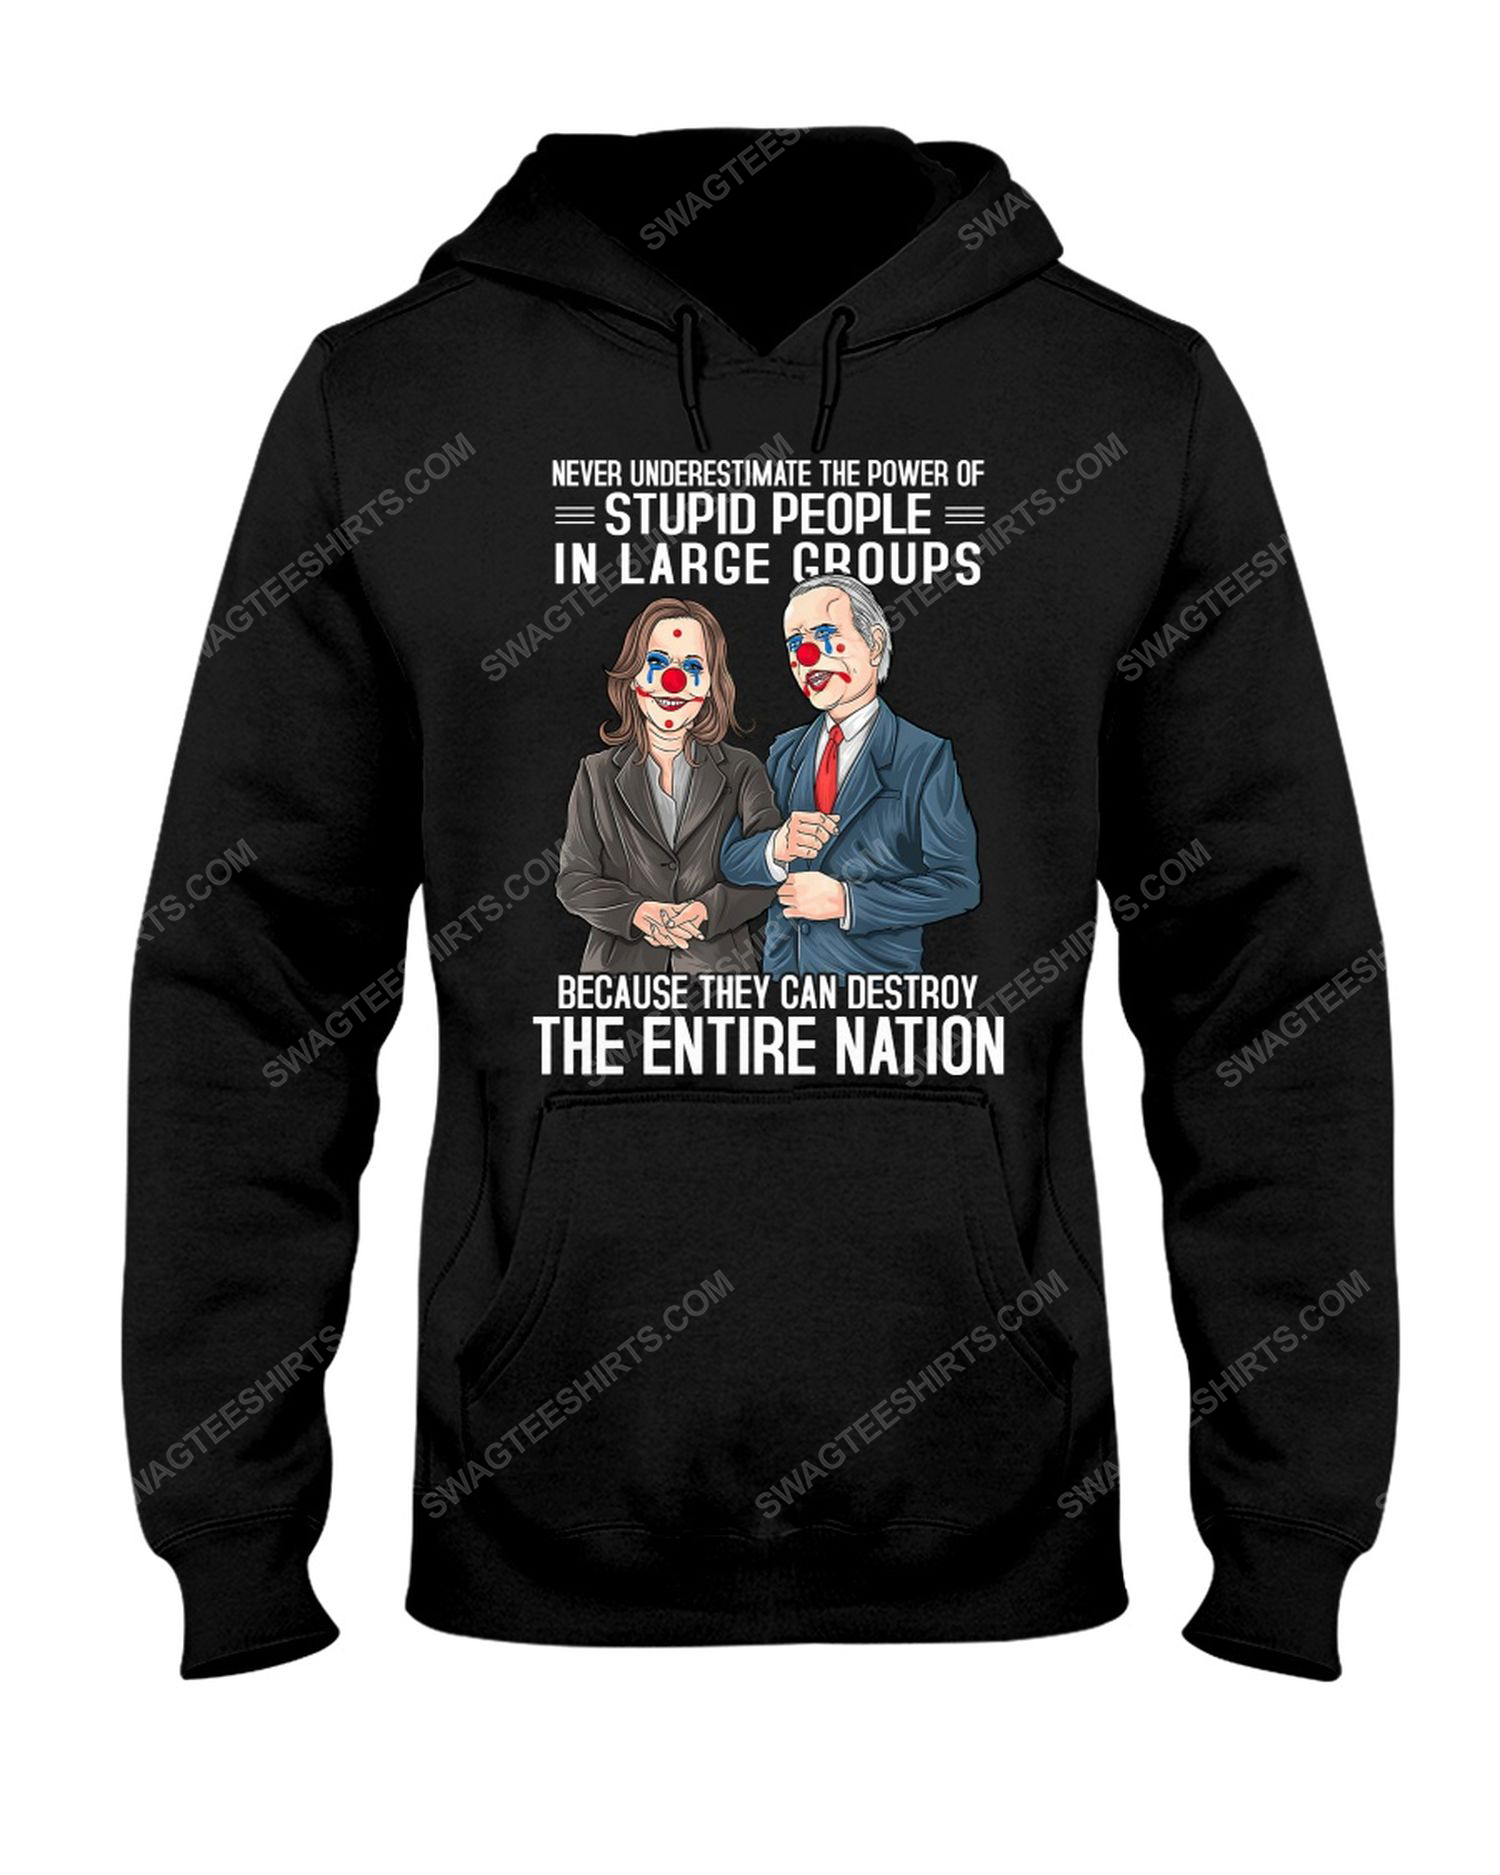 Never underestimate the power of stupid people in large groups clown face political hoodie